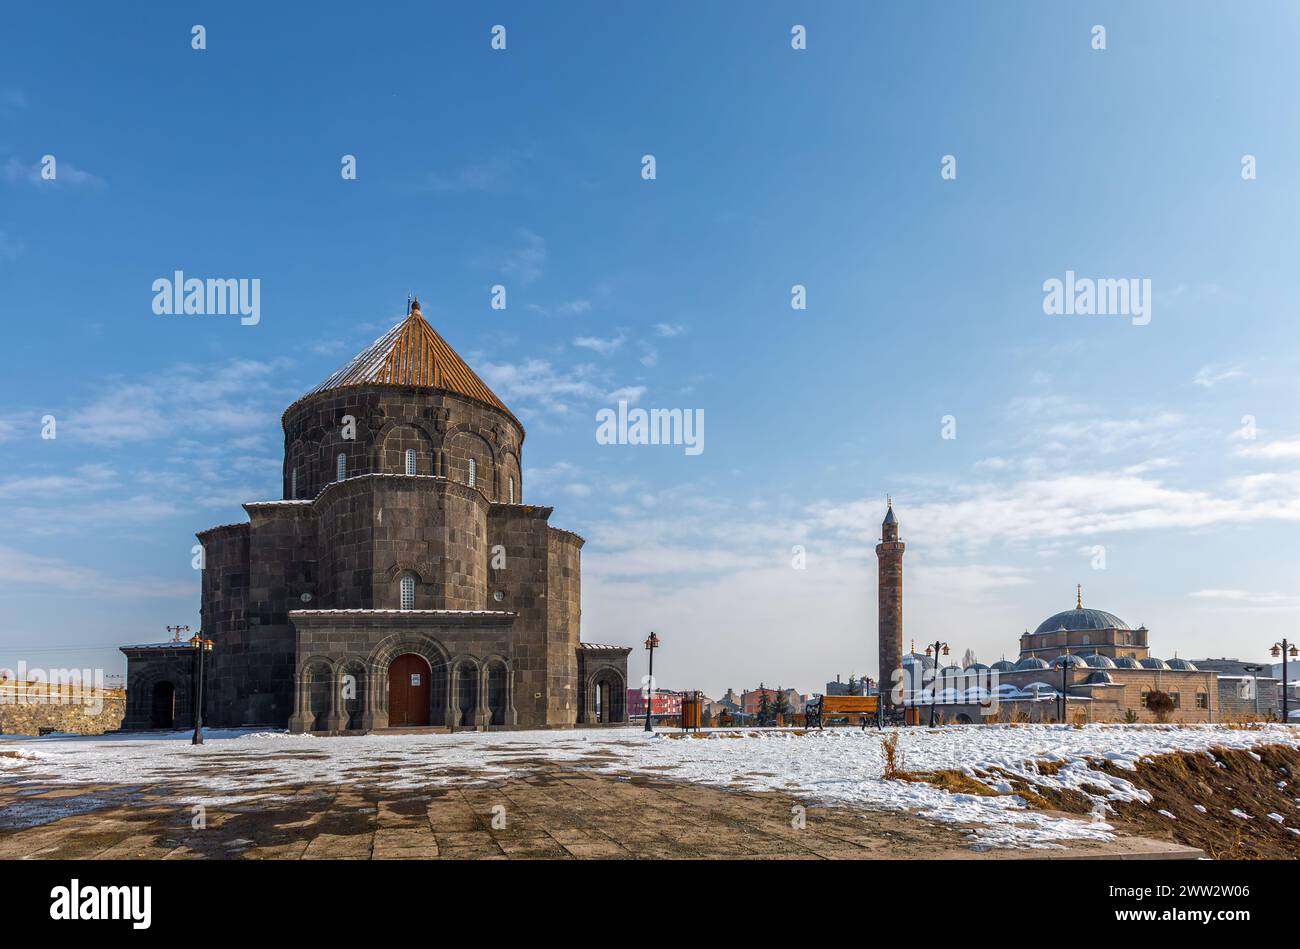 Historical Holy Apostles Church was built 10th century and also known as 12 apostles church and Kumbet Mosque in Kars, Eastern Anatolia Region Turkey. Stock Photo